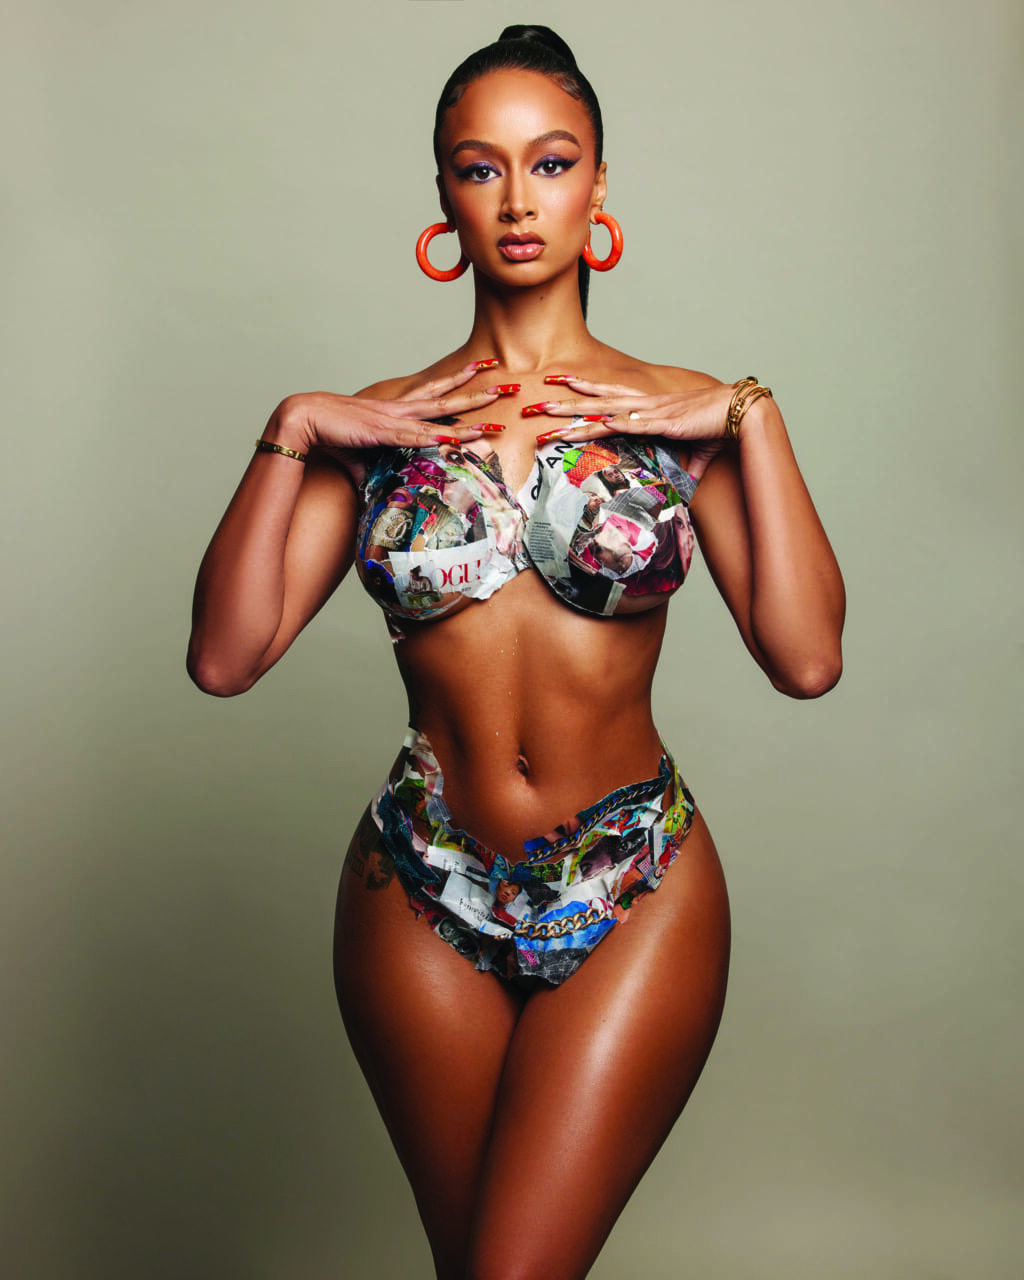 Model, Actress and Swimsuit Designer Draya Michele Is A Rising Star